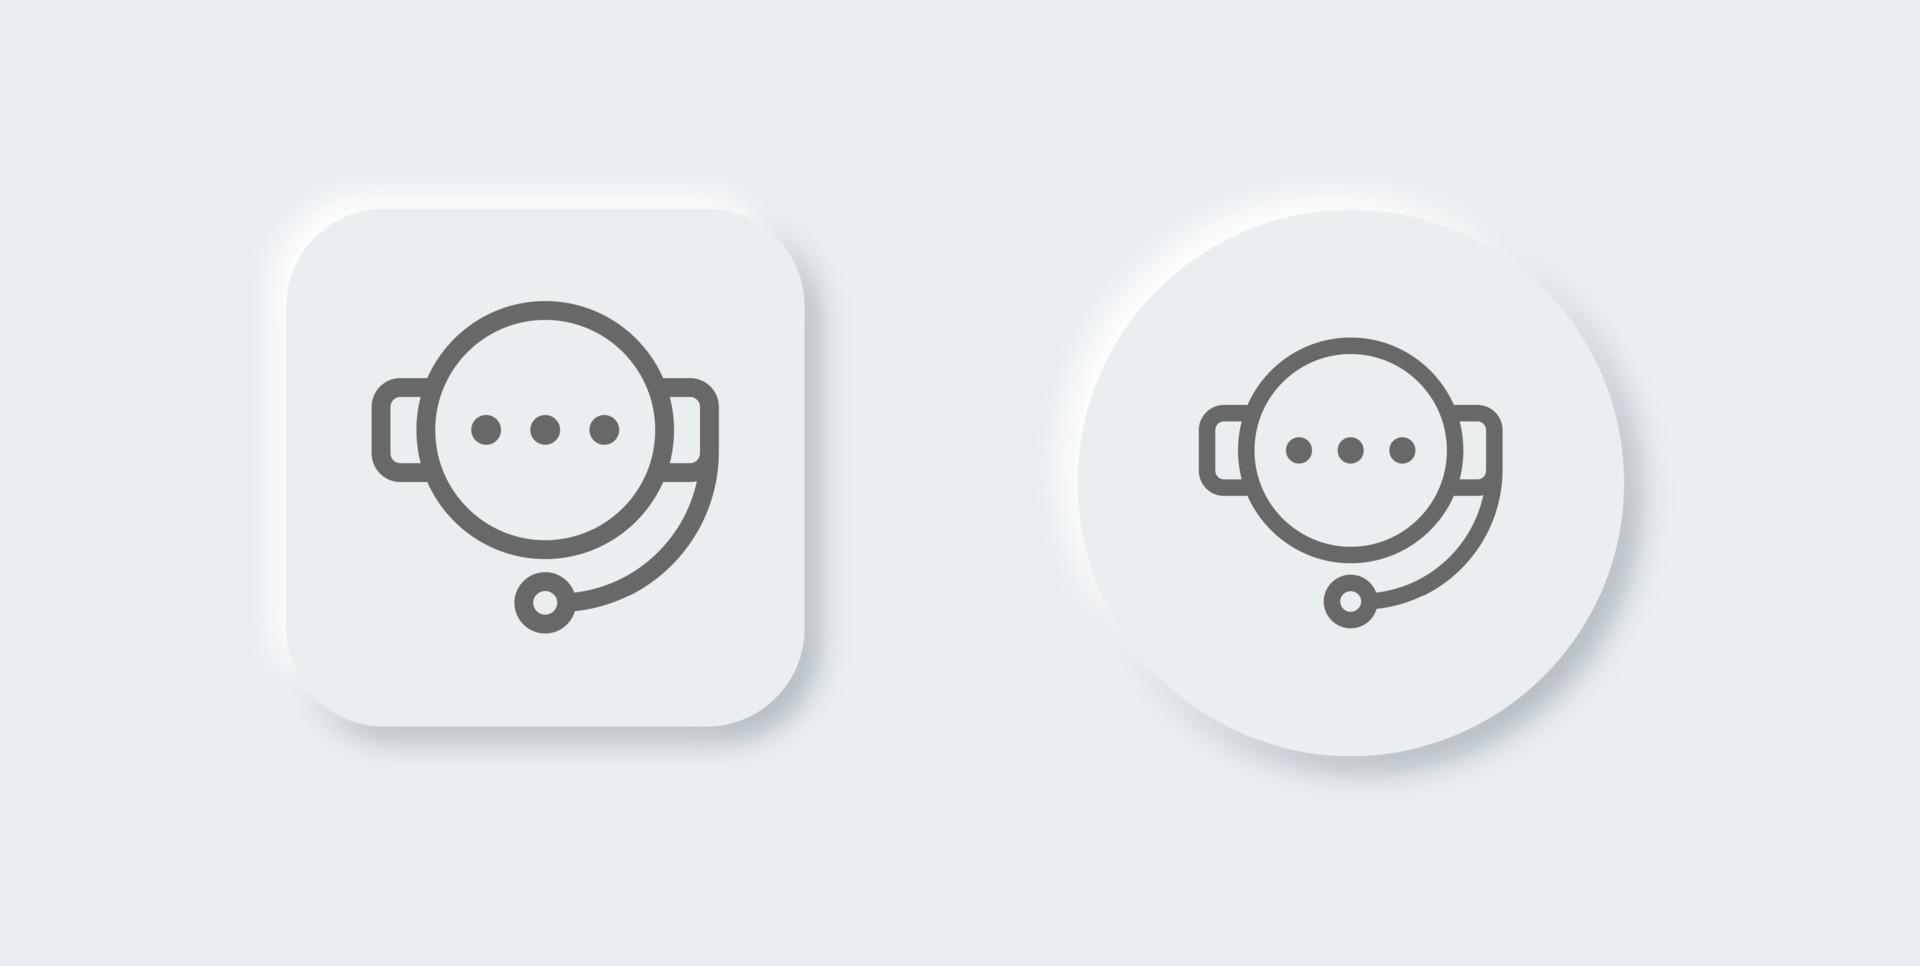 Call center line icon in neomorphic design style. Support signs vector illustration.